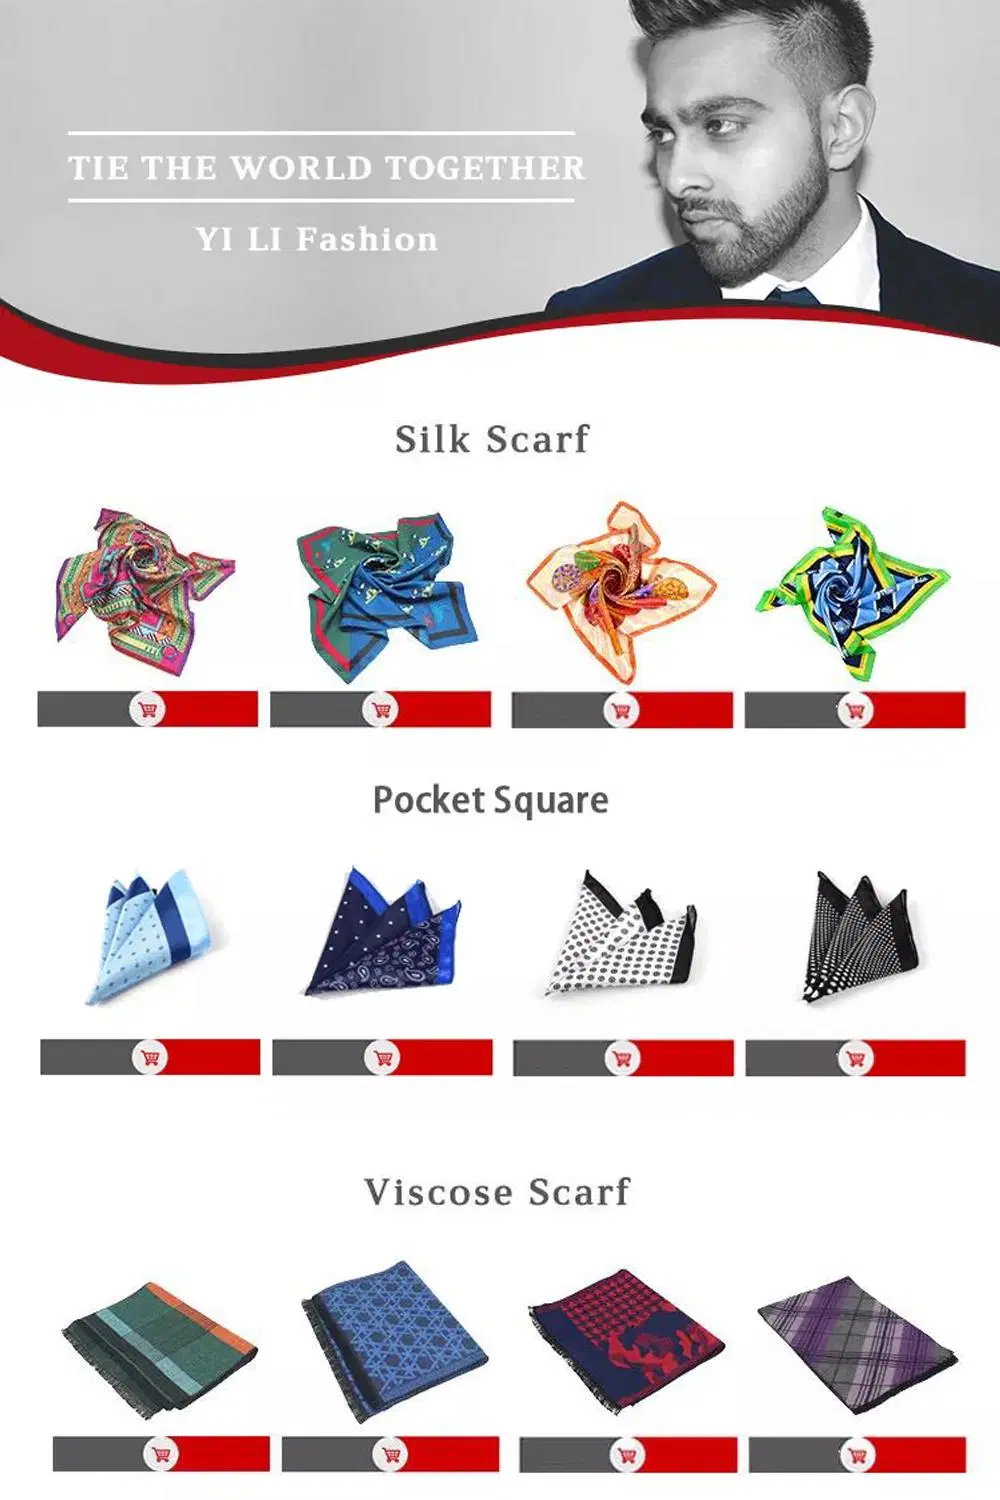 Printed Double-Layer Mulberry Silk Scarf Lady Silk Scarf Customization